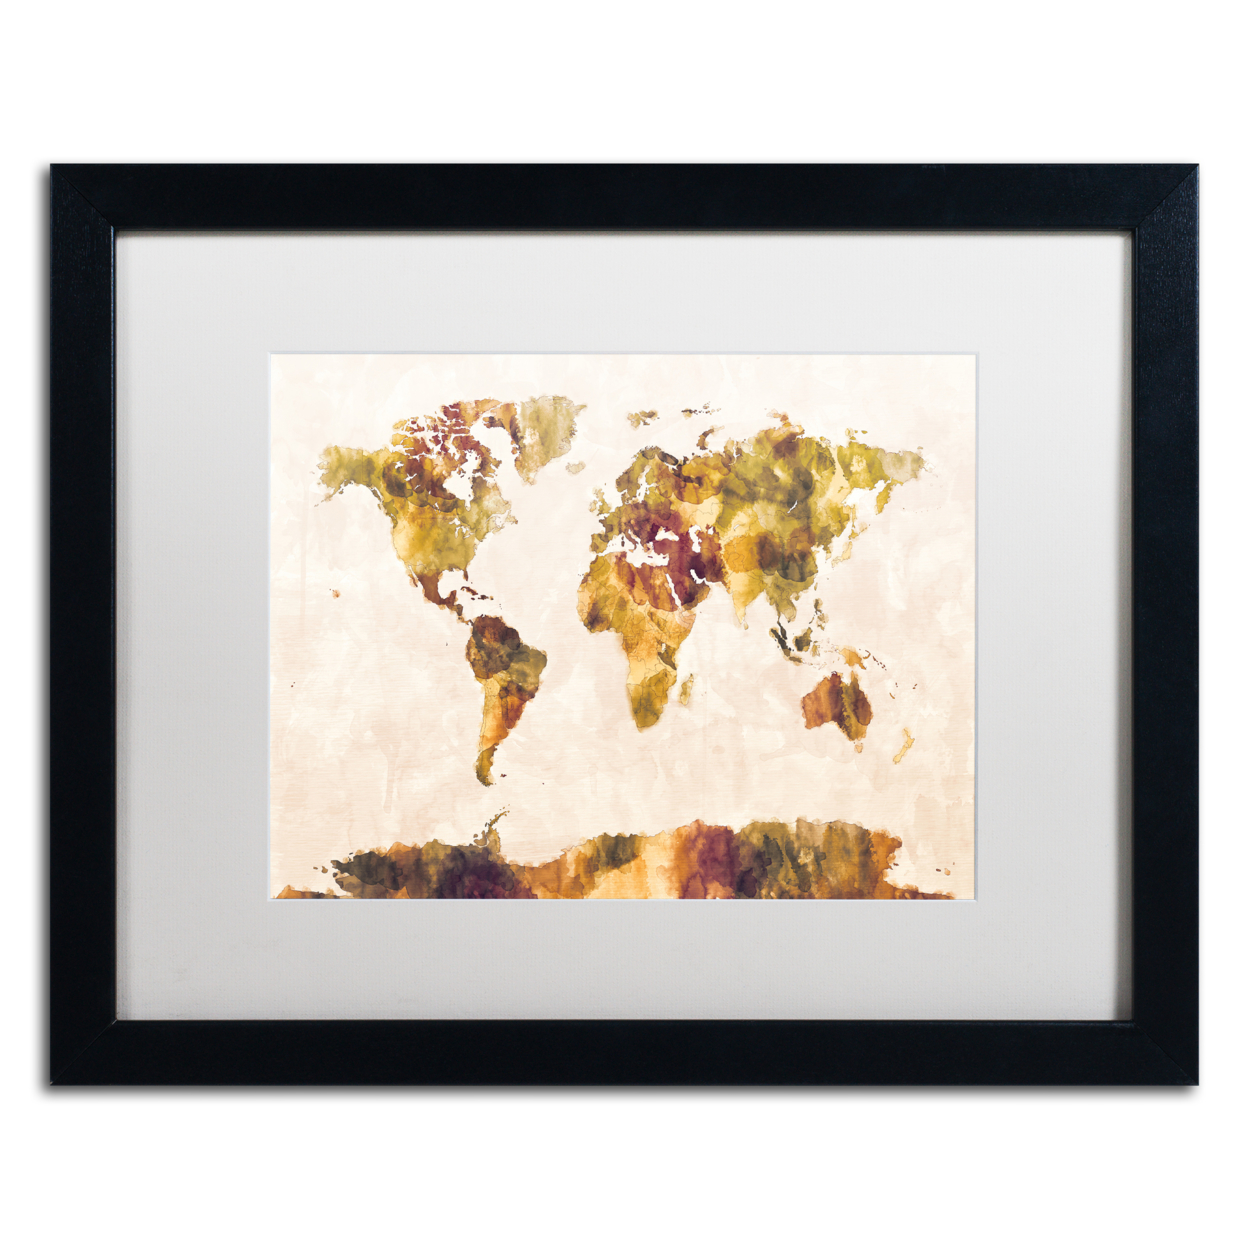 Michael Tompsett 'World Map Watercolor Painting' Black Wooden Framed Art 18 X 22 Inches